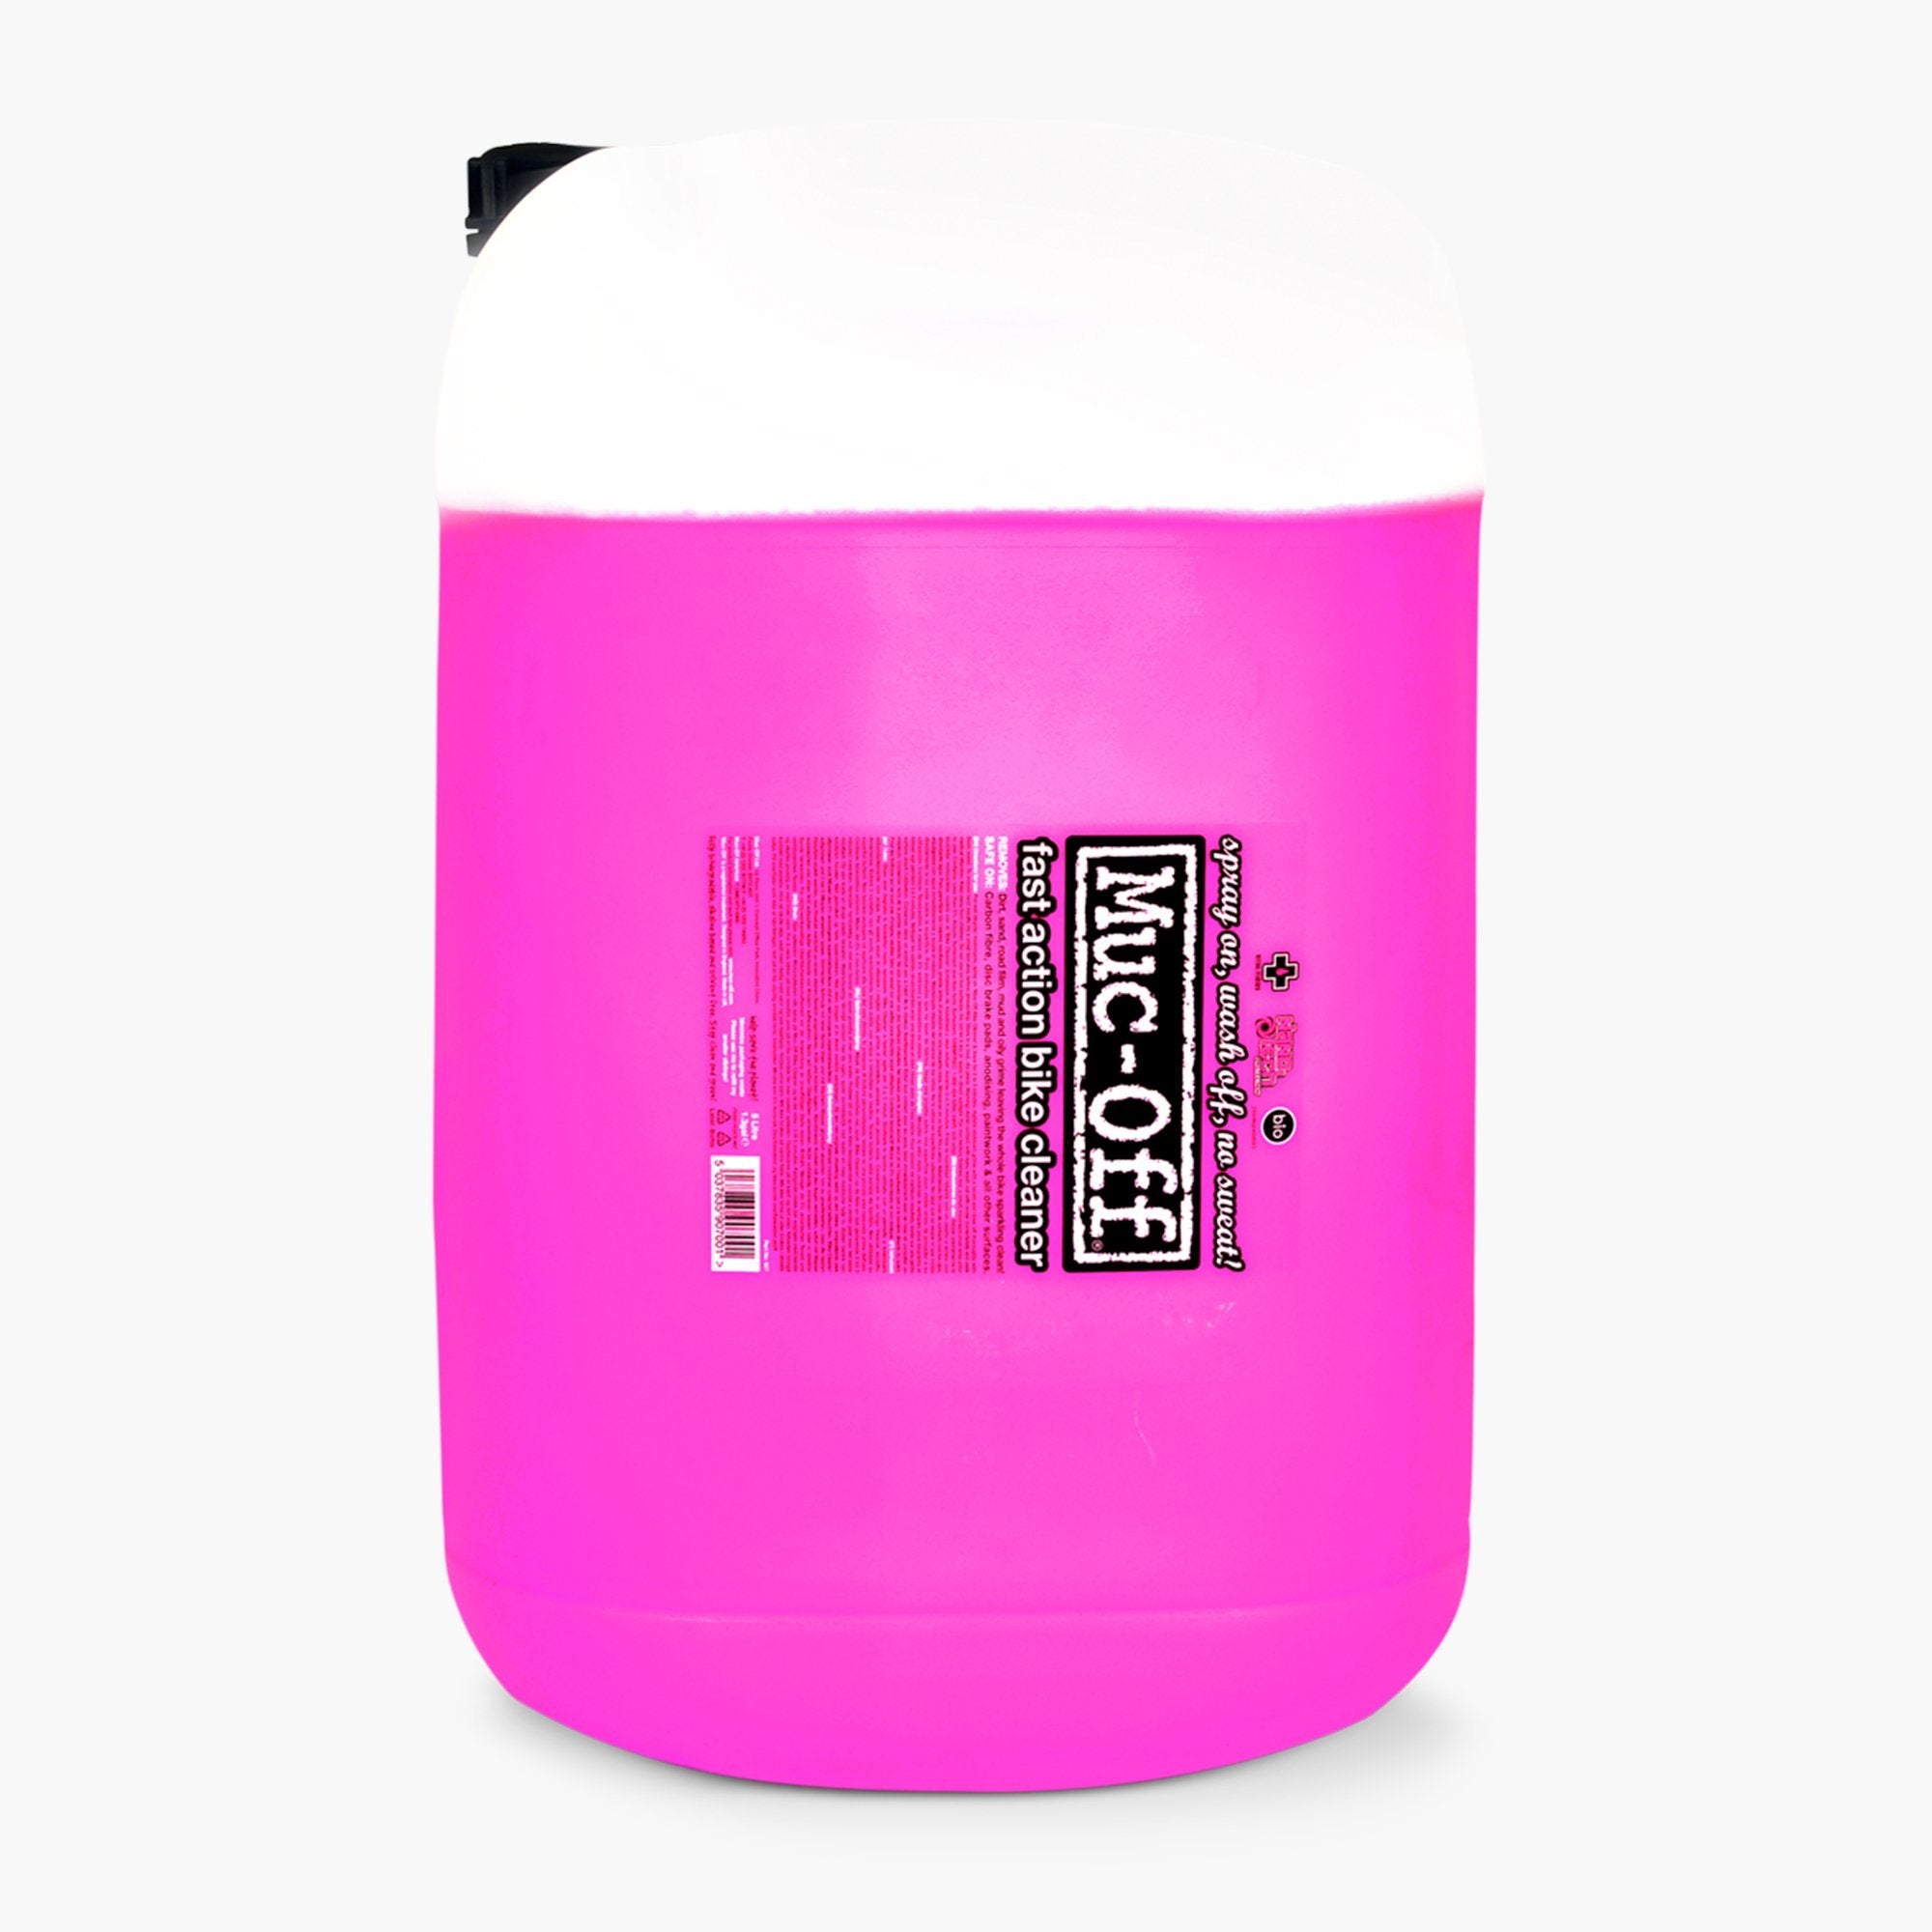 Muc-Off Motorcycle cleaner 1L - OnlyMX - For Cross & Supermoto Heroes